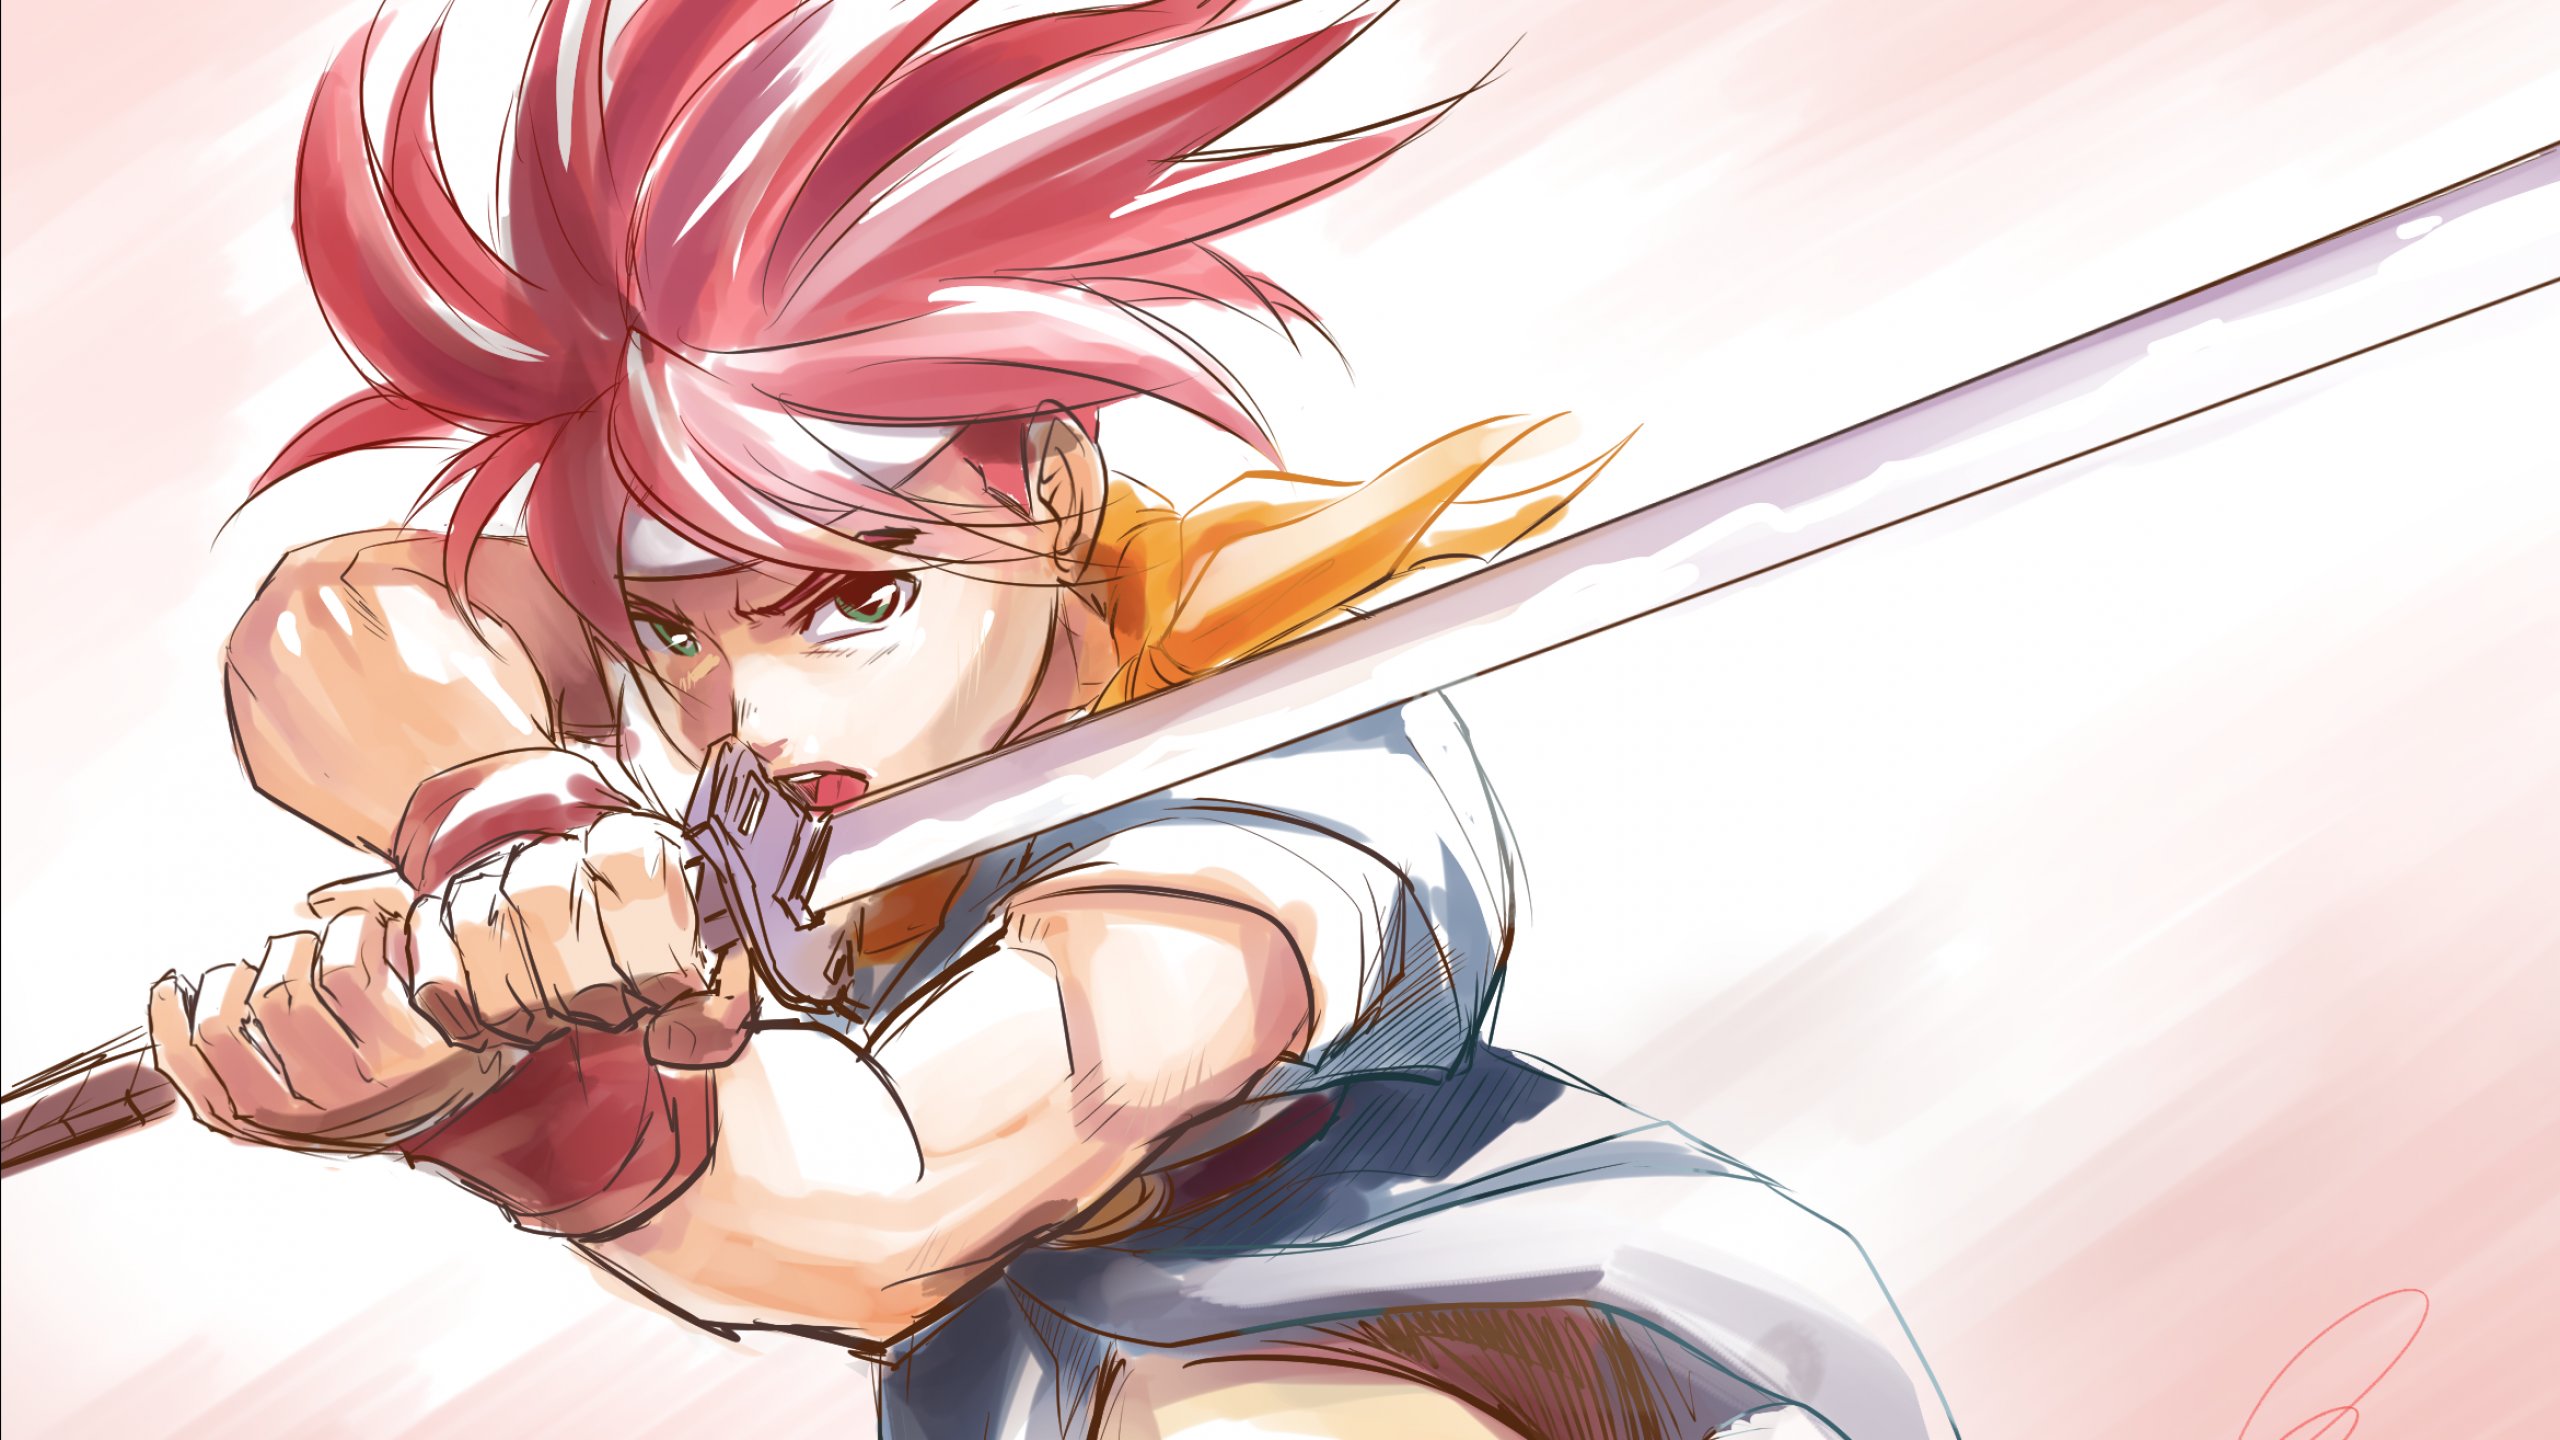 Chrono Trigger Rpg Anime Action Fantasy Wallpapers Hd Desktop And Mobile Backgrounds